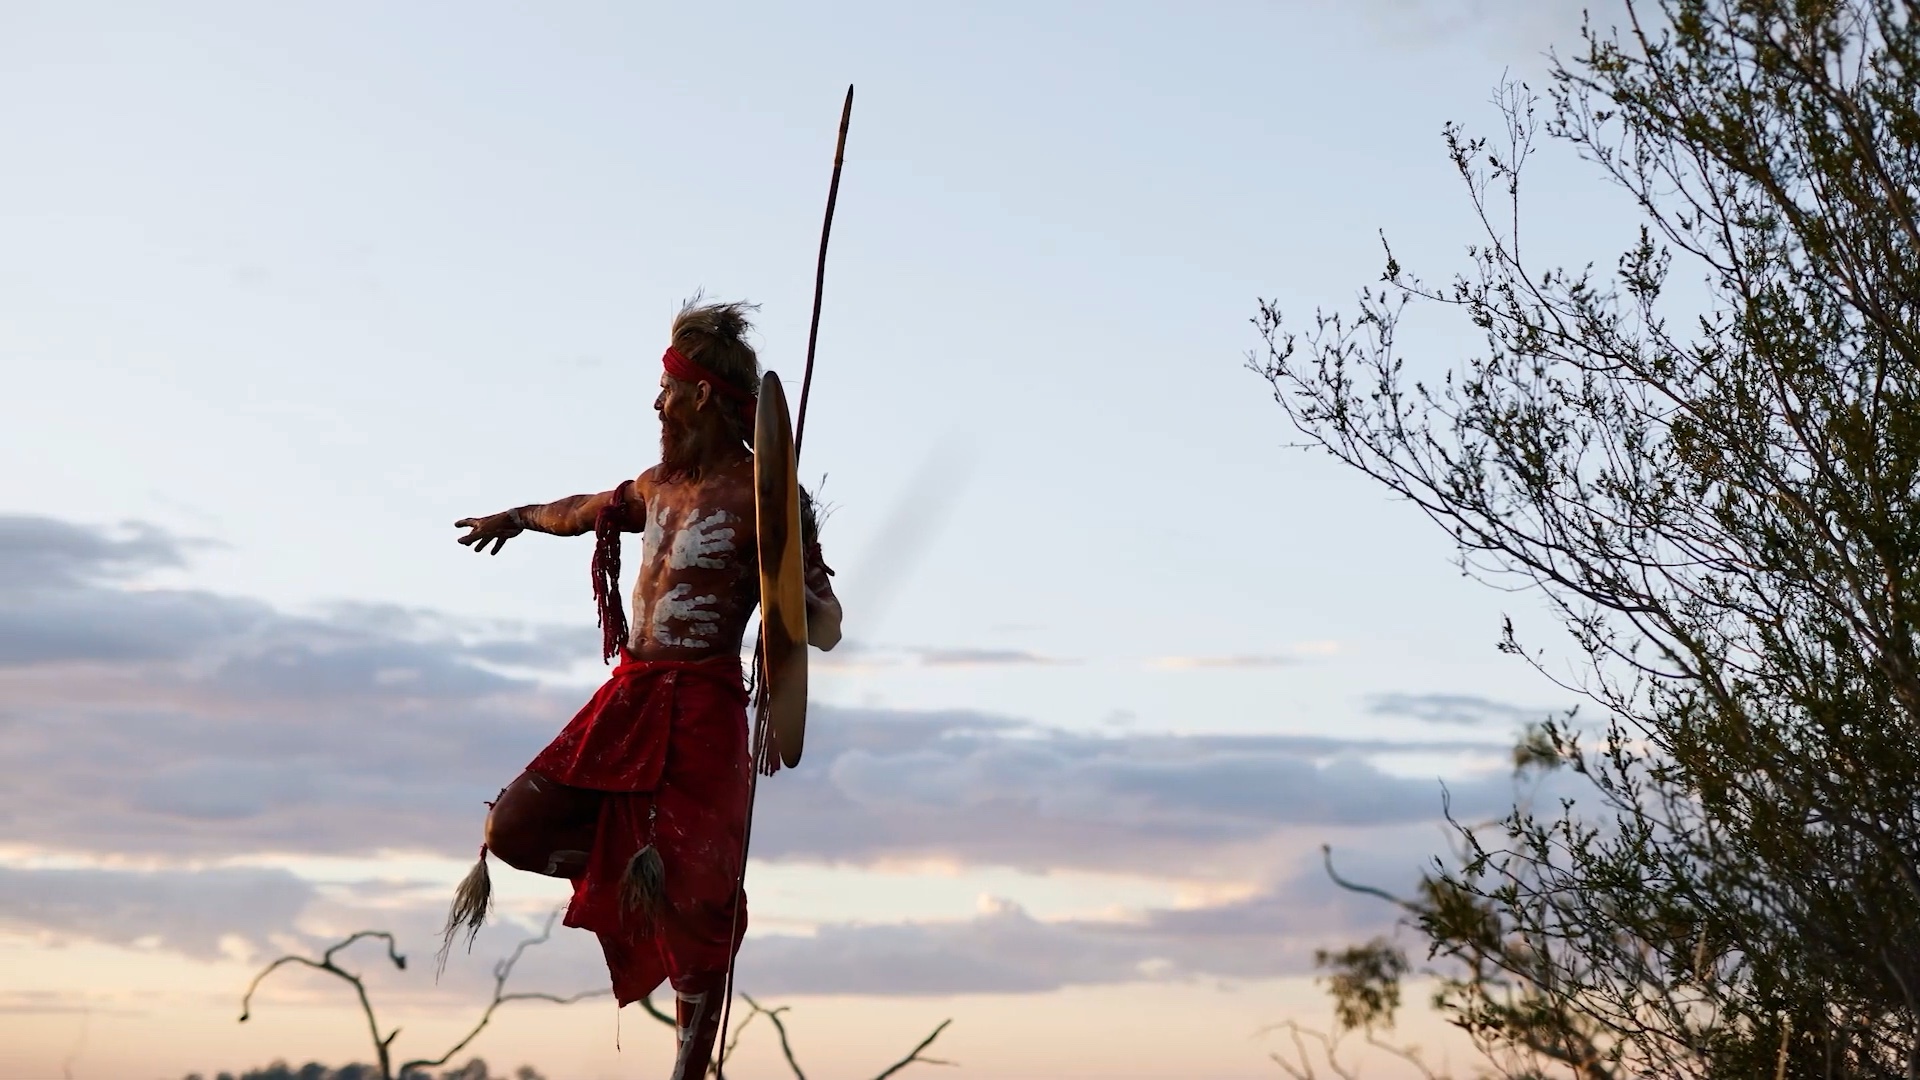 Yuandamarra holding a spear in First Nations traditional attire